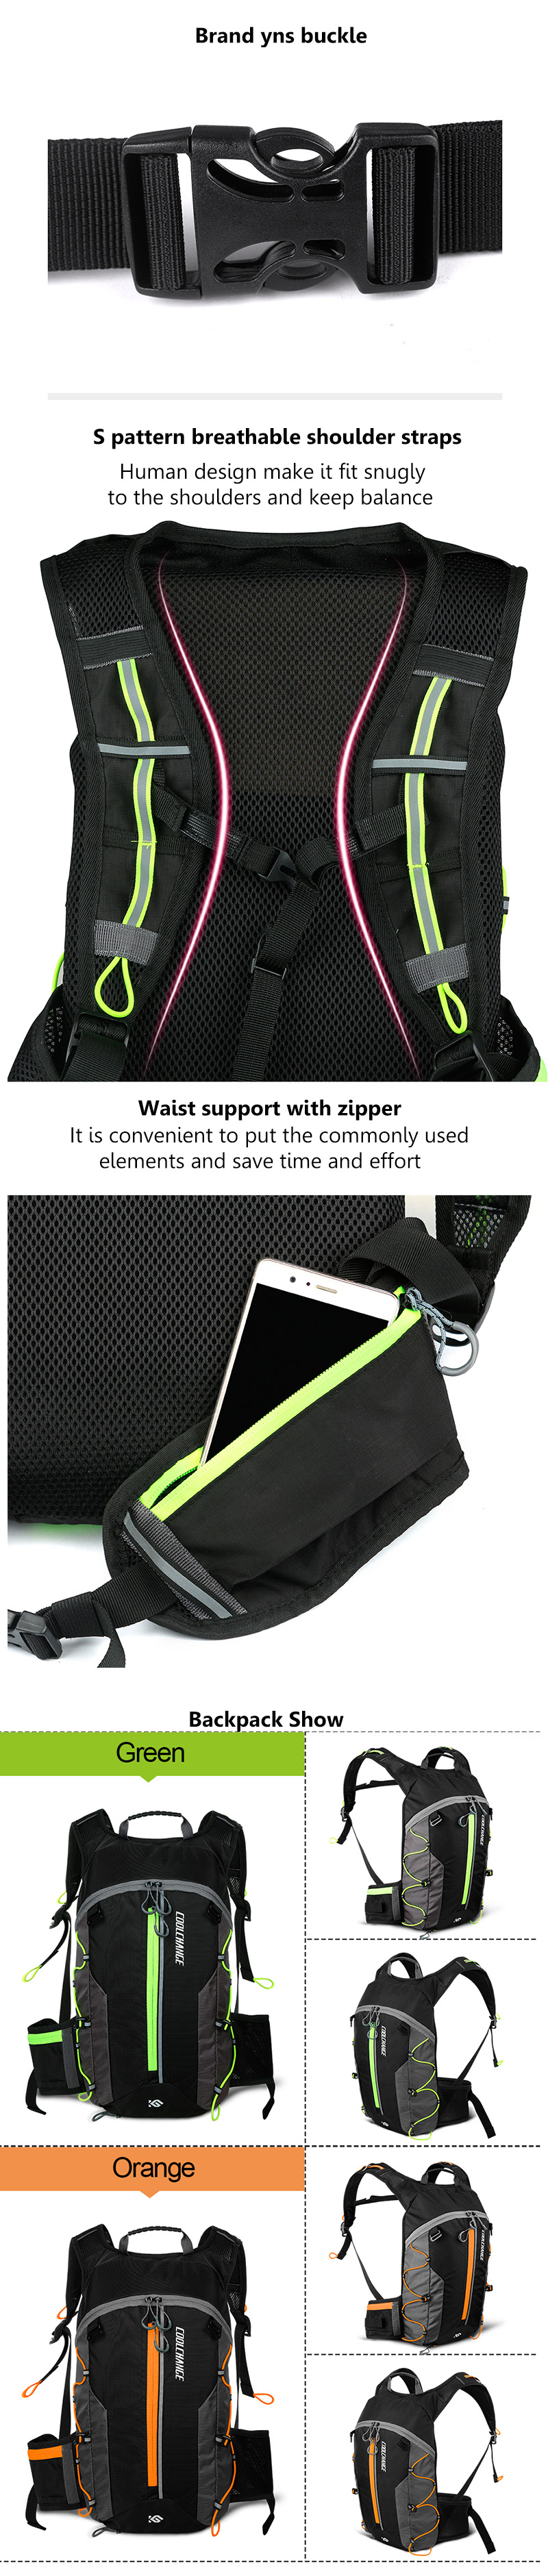 CoolChange 10L Ultralight Waterproof Sports Breathable Backpack Bicycle Bag Folding Water Bag